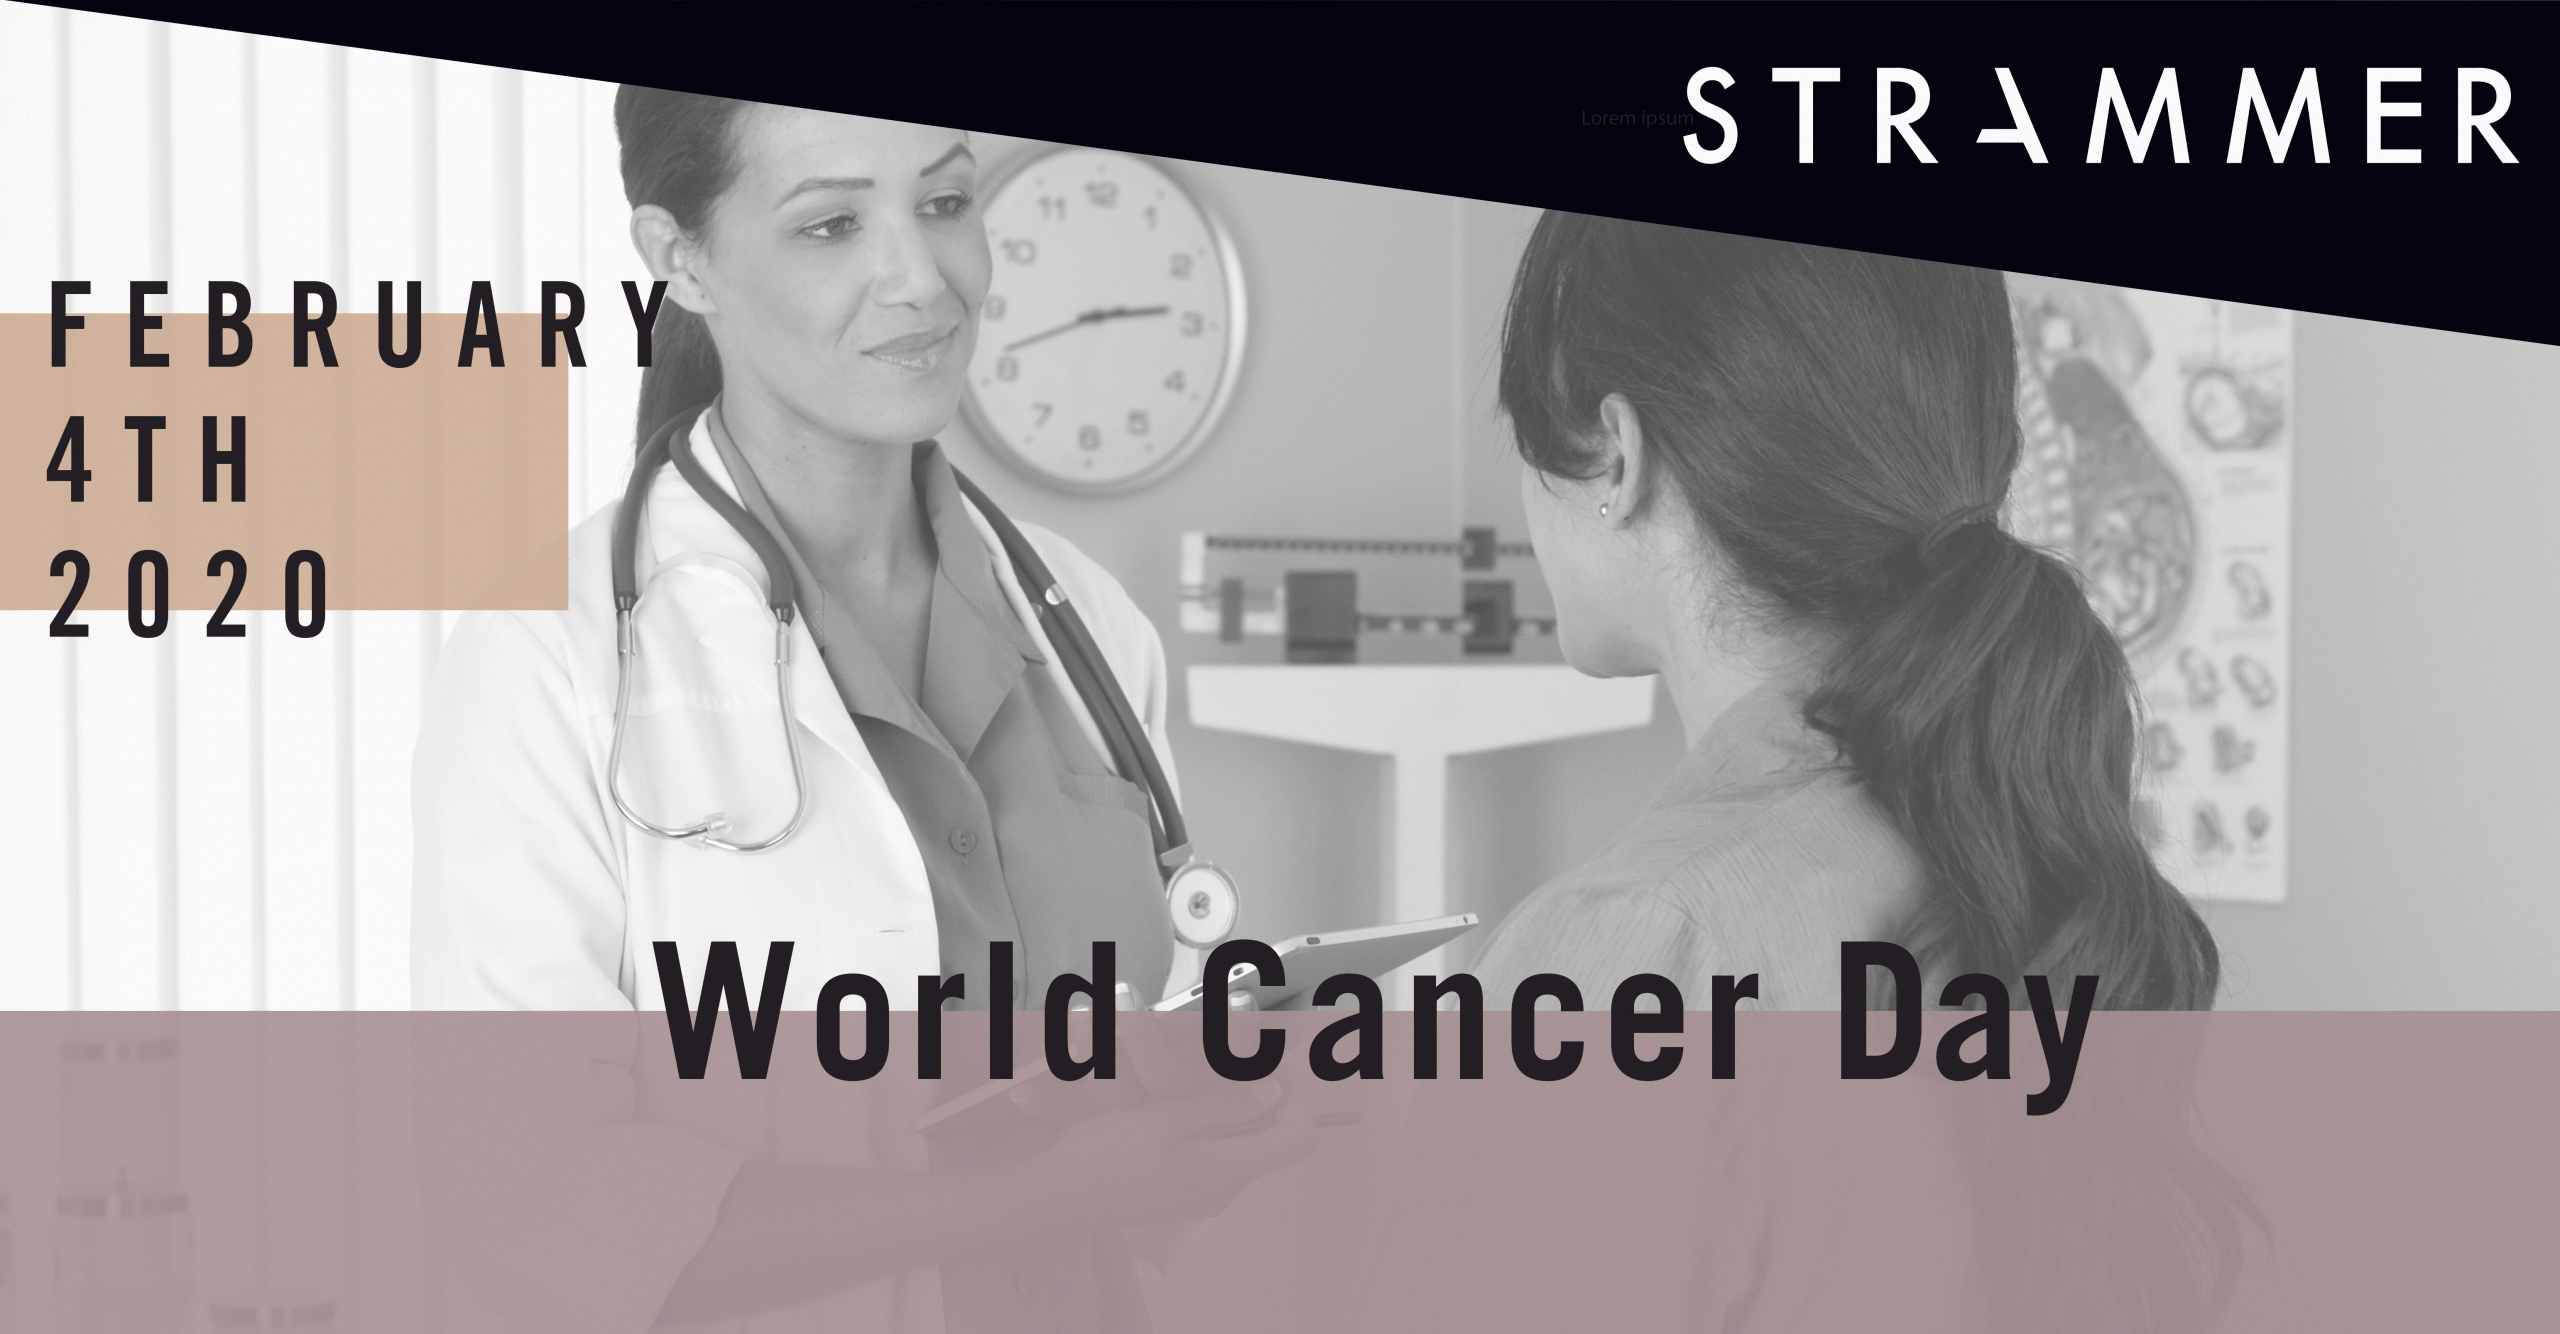 World Cancer Day: February 4th, 2020